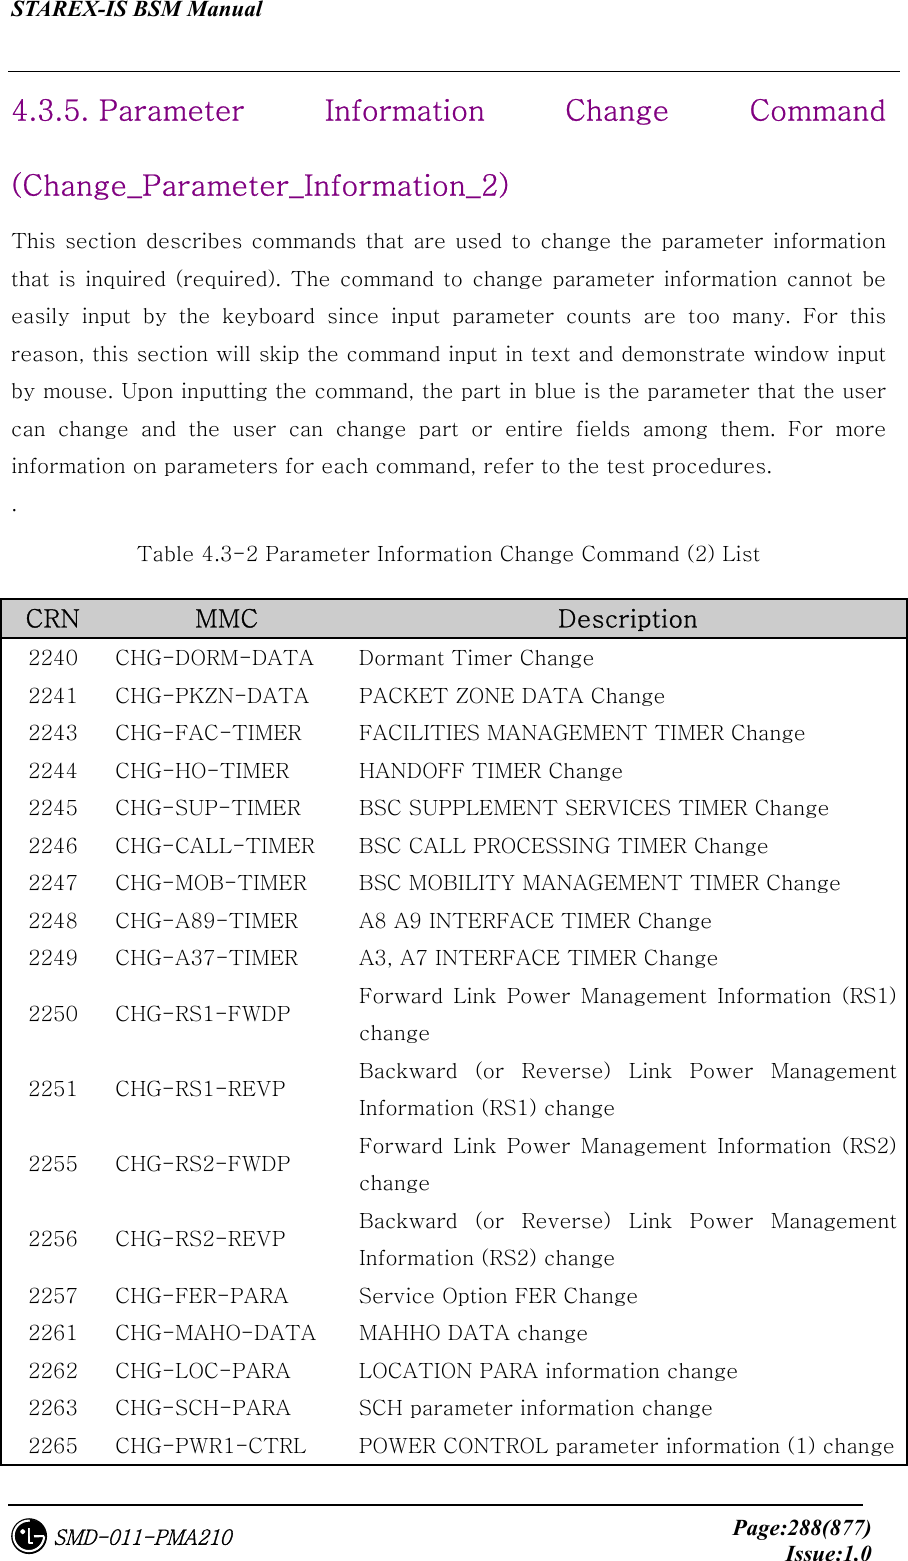 STAREX-IS BSM Manual     Page:288(877)Issue:1.0SMD-011-PMA210 4.3.5. Parameter  Information  Change  Command (Change_Parameter_Information_2) This section  describes  commands  that  are  used  to  change the  parameter  information that is  inquired (required). The  command  to  change  parameter  information cannot be easily input by the keyboard since input parameter counts are too  many.  For  this reason, this section will skip the command input in text and demonstrate window input by mouse. Upon inputting the command, the part in blue is the parameter that the user can  change  and  the  user  can  change  part  or  entire  fields  among  them.  For  more information on parameters for each command, refer to the test procedures.  . Table 4.3-2 Parameter Information Change Command (2) List CRN  MMC  Description 2240  CHG-DORM-DATA  Dormant Timer Change 2241  CHG-PKZN-DATA  PACKET ZONE DATA Change 2243  CHG-FAC-TIMER  FACILITIES MANAGEMENT TIMER Change 2244  CHG-HO-TIMER  HANDOFF TIMER Change 2245  CHG-SUP-TIMER  BSC SUPPLEMENT SERVICES TIMER Change 2246  CHG-CALL-TIMER  BSC CALL PROCESSING TIMER Change 2247  CHG-MOB-TIMER  BSC MOBILITY MANAGEMENT TIMER Change 2248  CHG-A89-TIMER  A8 A9 INTERFACE TIMER Change 2249  CHG-A37-TIMER  A3, A7 INTERFACE TIMER Change 2250  CHG-RS1-FWDP  Forward  Link  Power  Management  Information  (RS1) change   2251  CHG-RS1-REVP  Backward (or Reverse) Link  Power  Management Information (RS1) change   2255  CHG-RS2-FWDP  Forward  Link  Power  Management  Information  (RS2) change 2256  CHG-RS2-REVP  Backward (or Reverse) Link  Power  Management Information (RS2) change 2257  CHG-FER-PARA  Service Option FER Change 2261  CHG-MAHO-DATA  MAHHO DATA change 2262  CHG-LOC-PARA  LOCATION PARA information change 2263  CHG-SCH-PARA  SCH parameter information change 2265  CHG-PWR1-CTRL  POWER CONTROL parameter information (1) change   